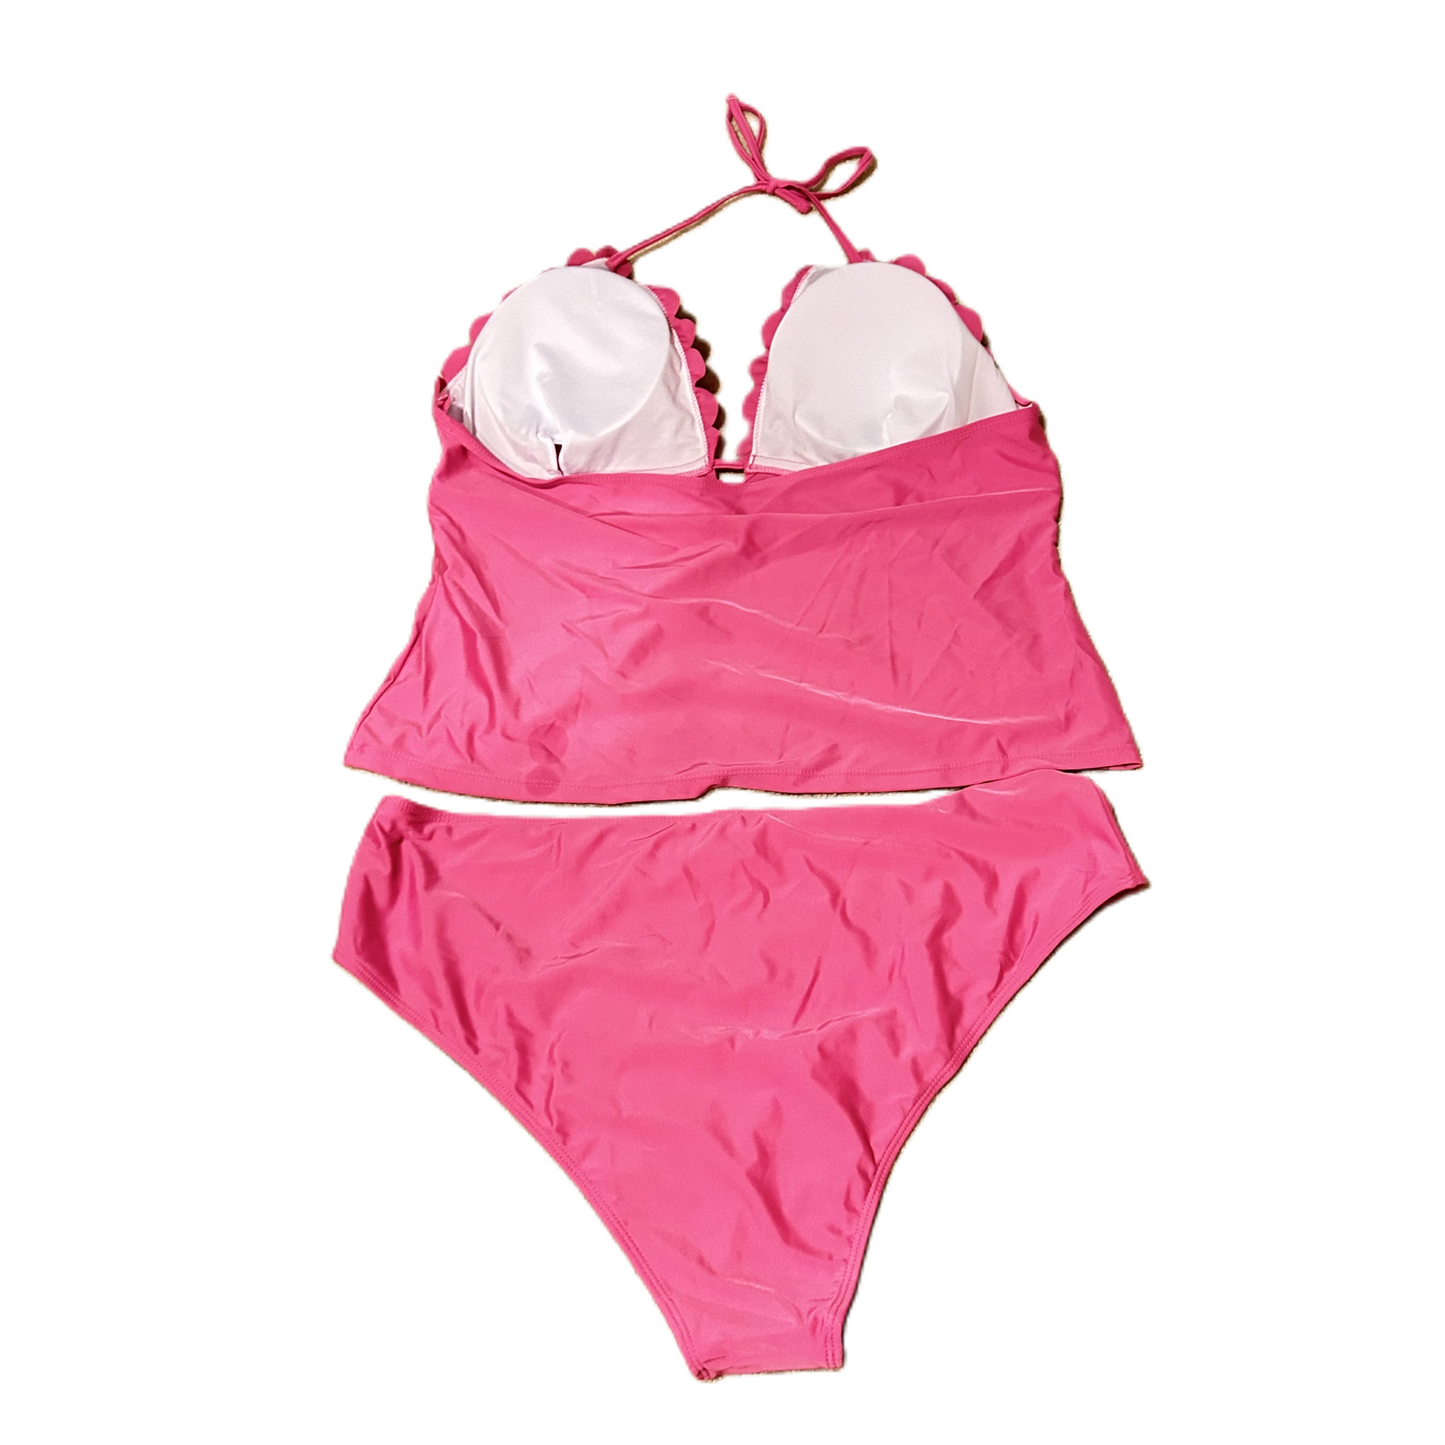 Hot Pink Swimsuit 2pc By Shein, Size: 4x